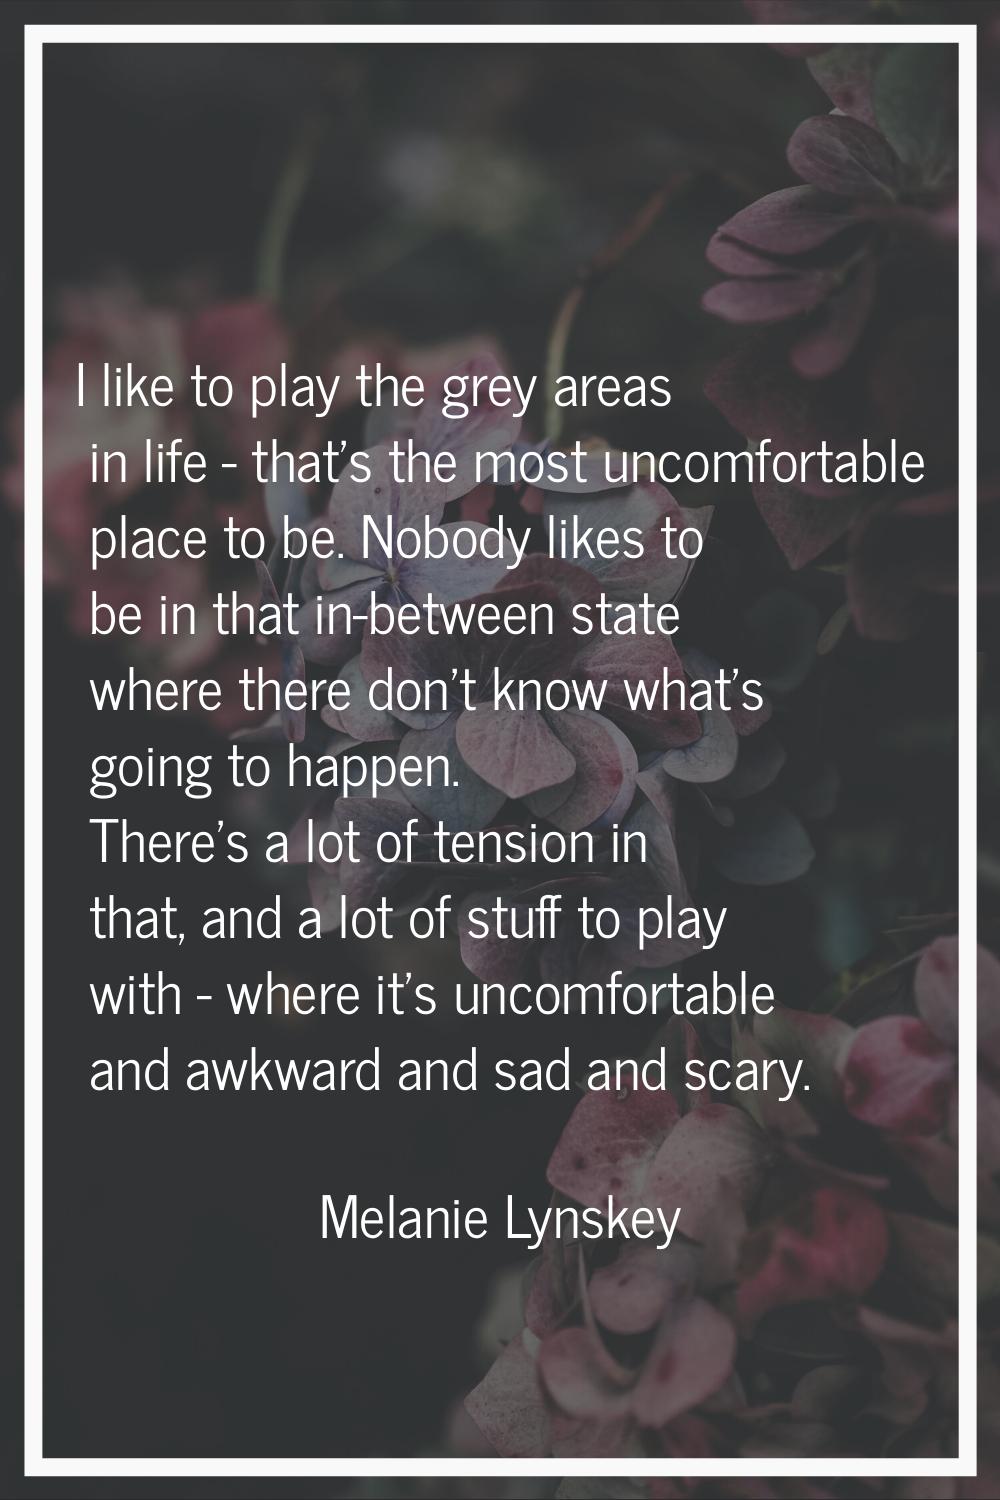 I like to play the grey areas in life - that's the most uncomfortable place to be. Nobody likes to 